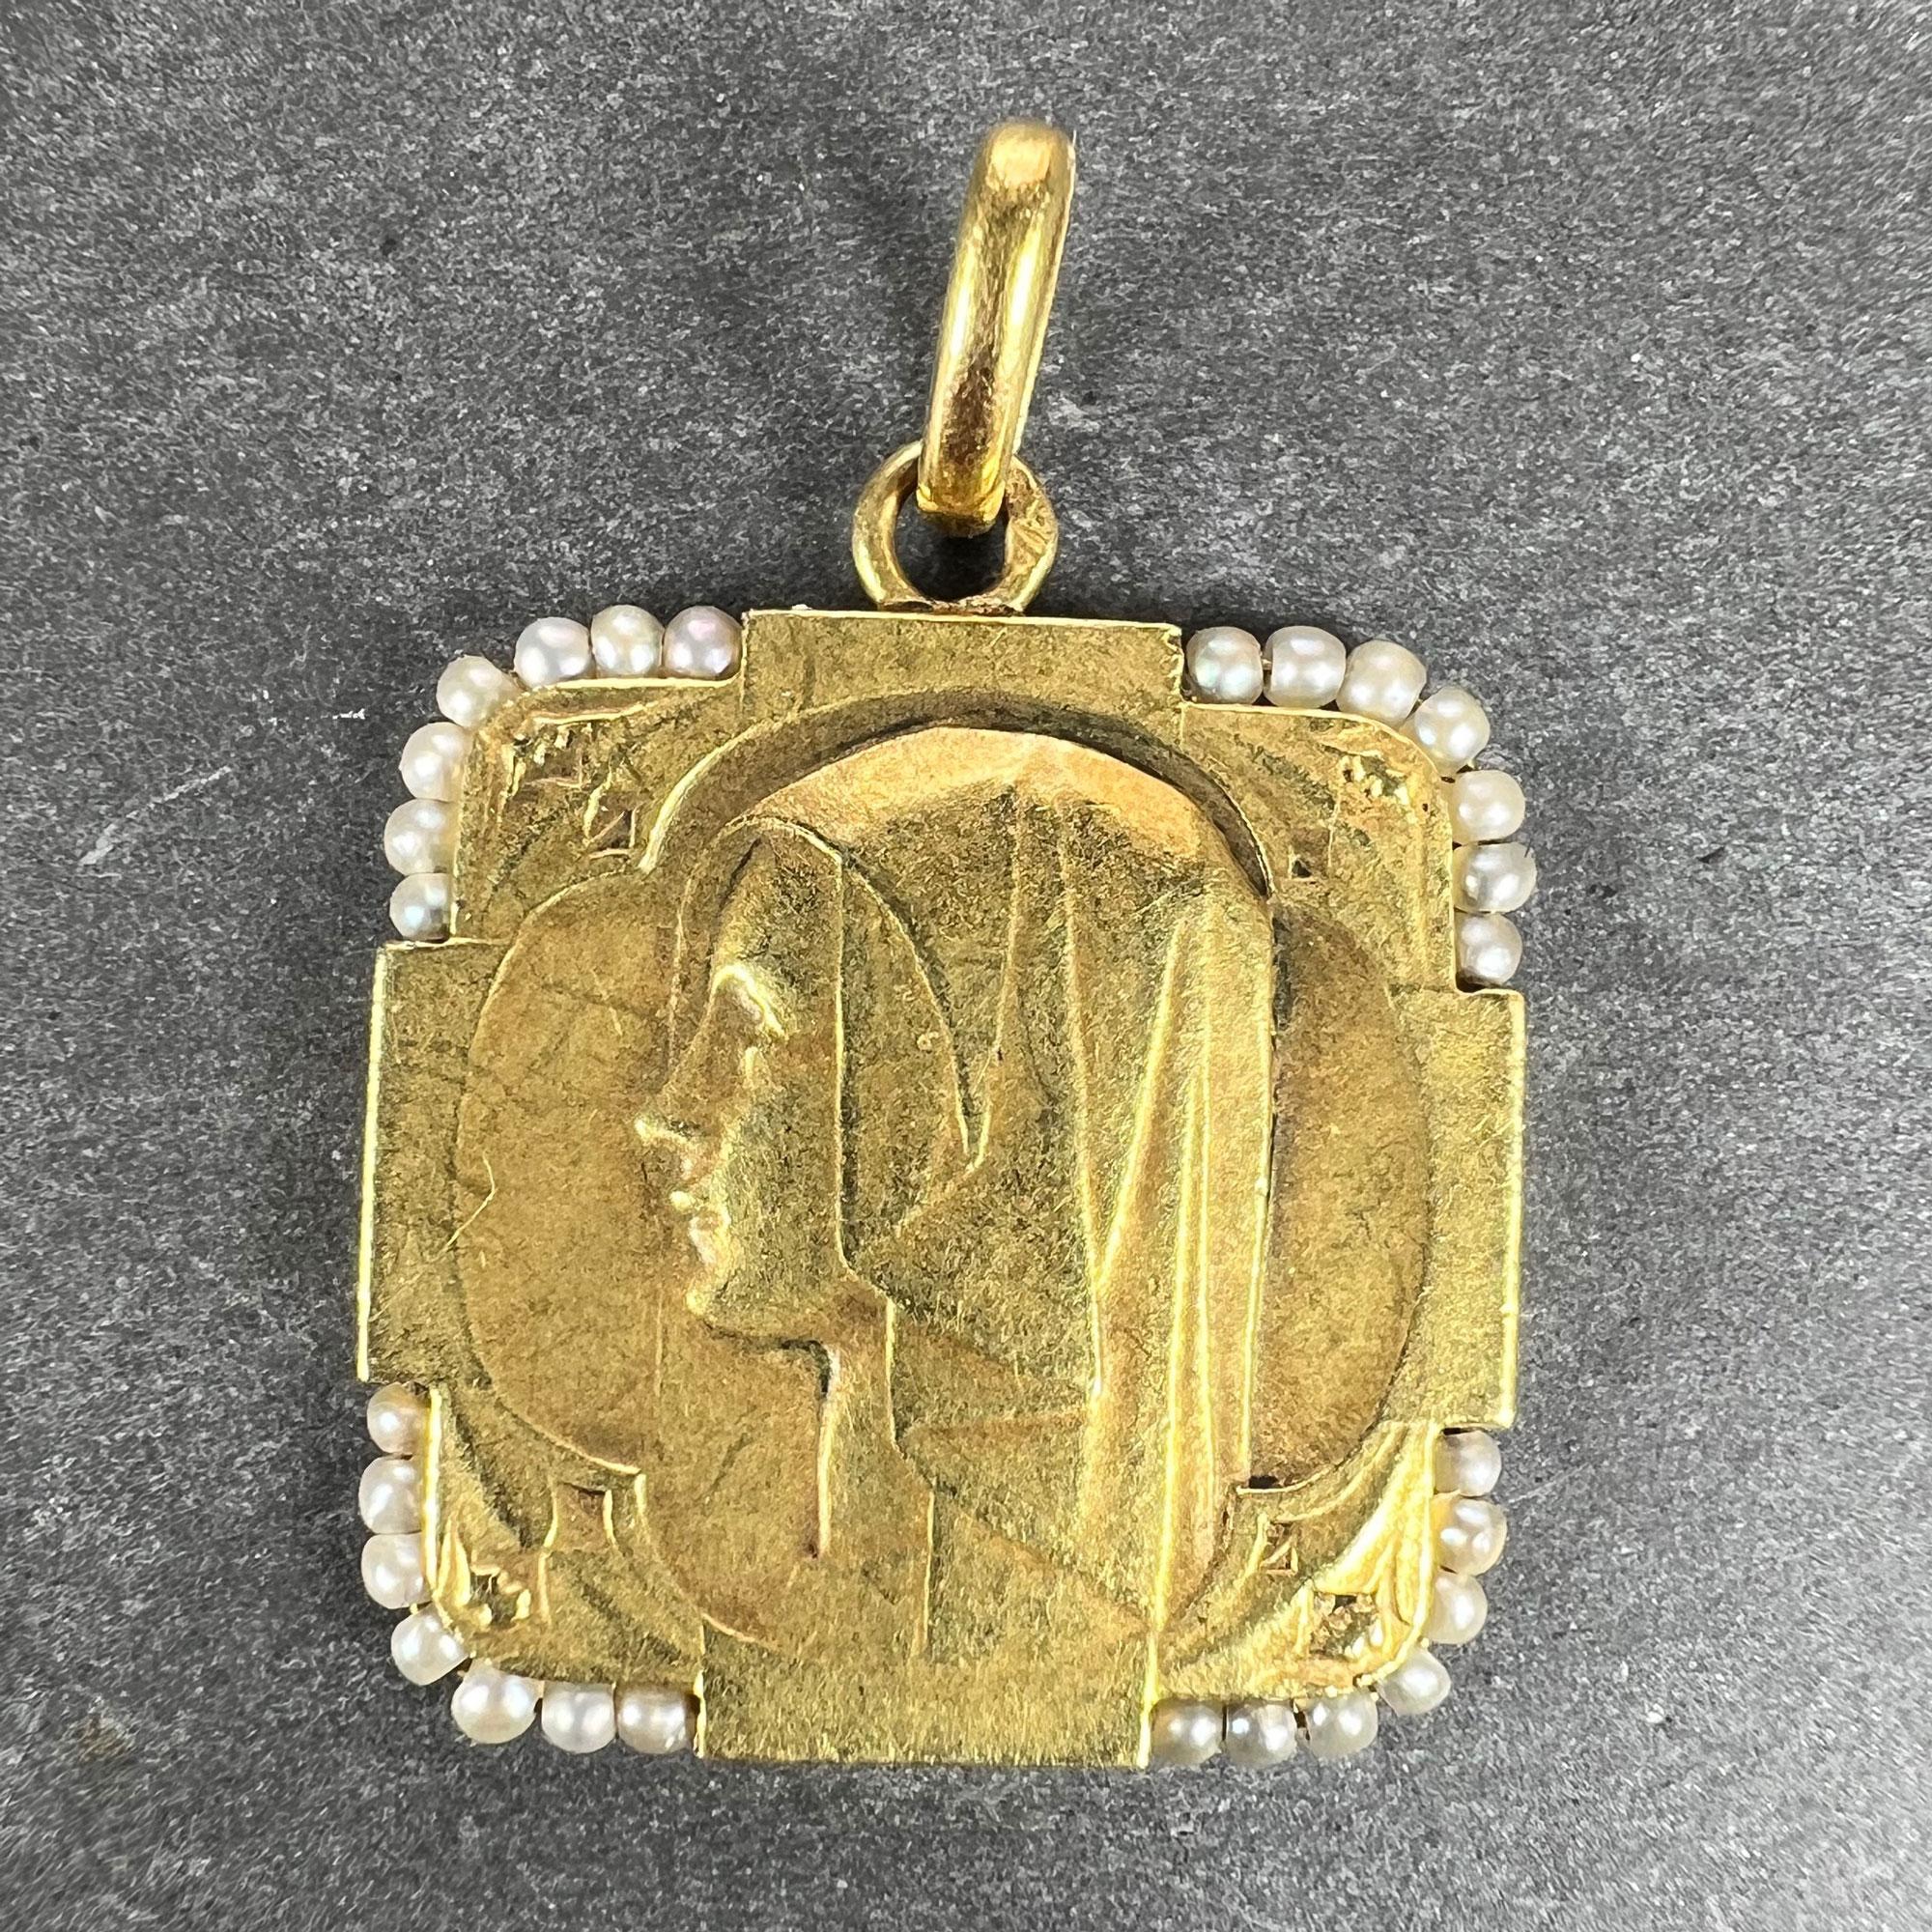 A French 18 karat (18K) yellow gold charm pendant designed as a medal depicting the Virgin Mary surrounded at the corners by a seed pearl border with 28 natural seed pearls. Stamped with the eagle mark for 18 karat gold and French manufacture with